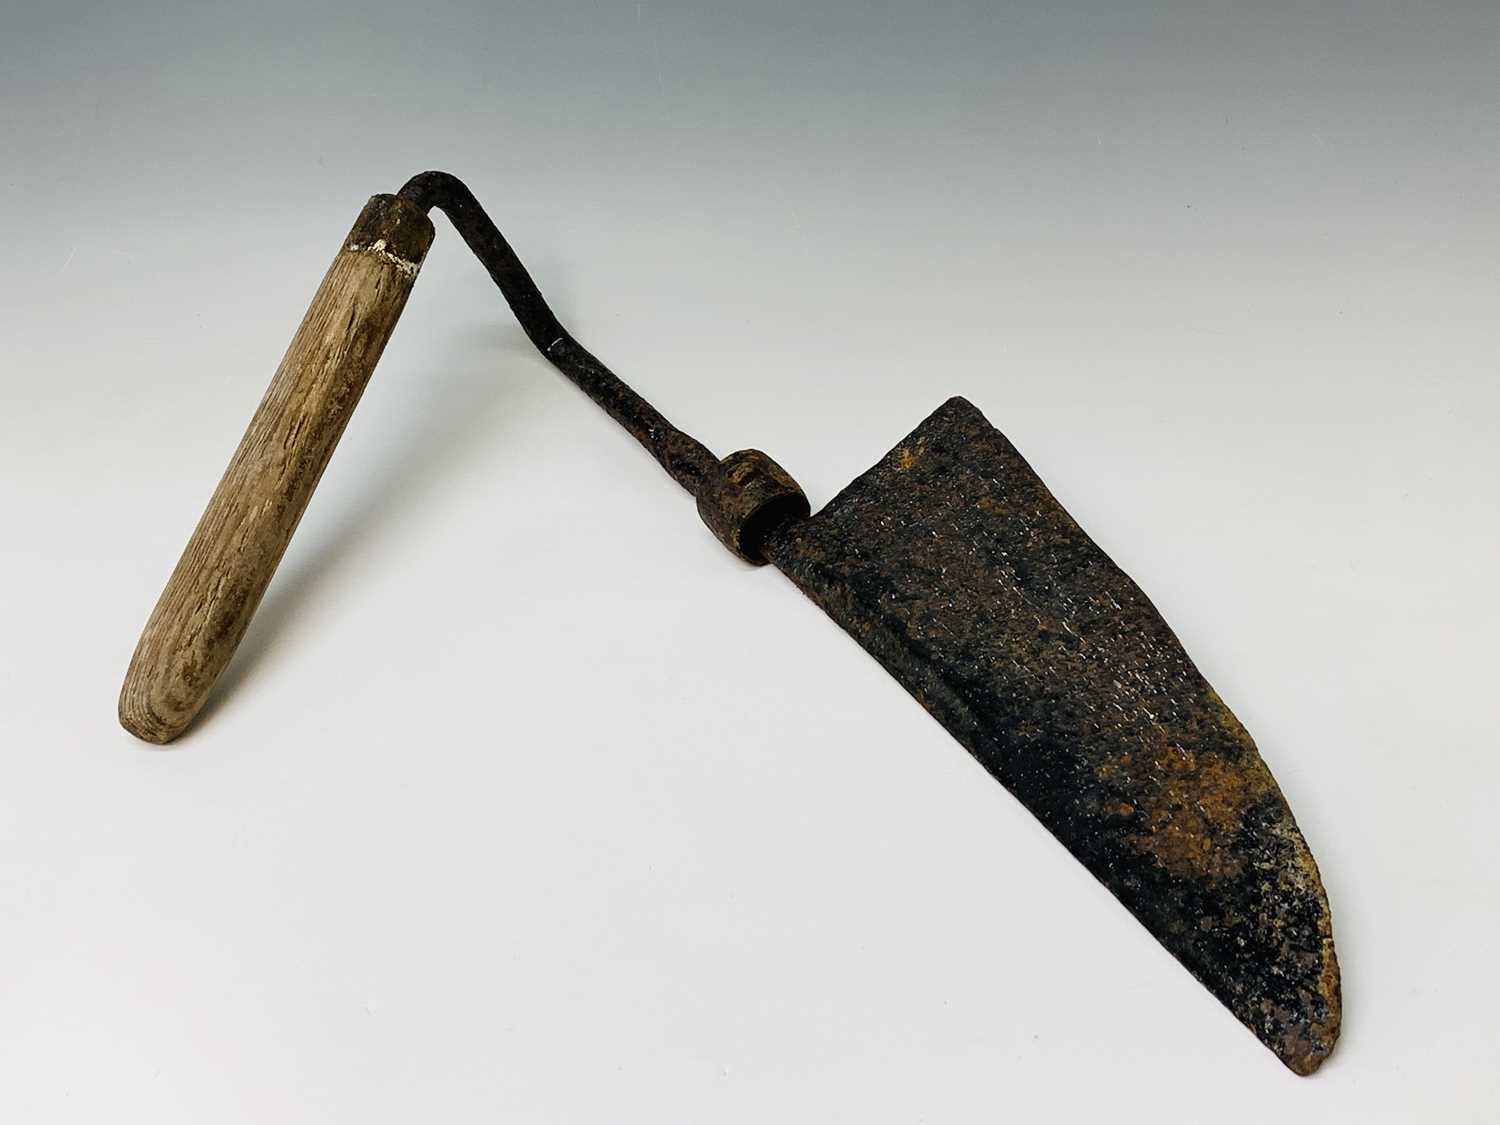 Sold at Auction: Hand-forged hay knife